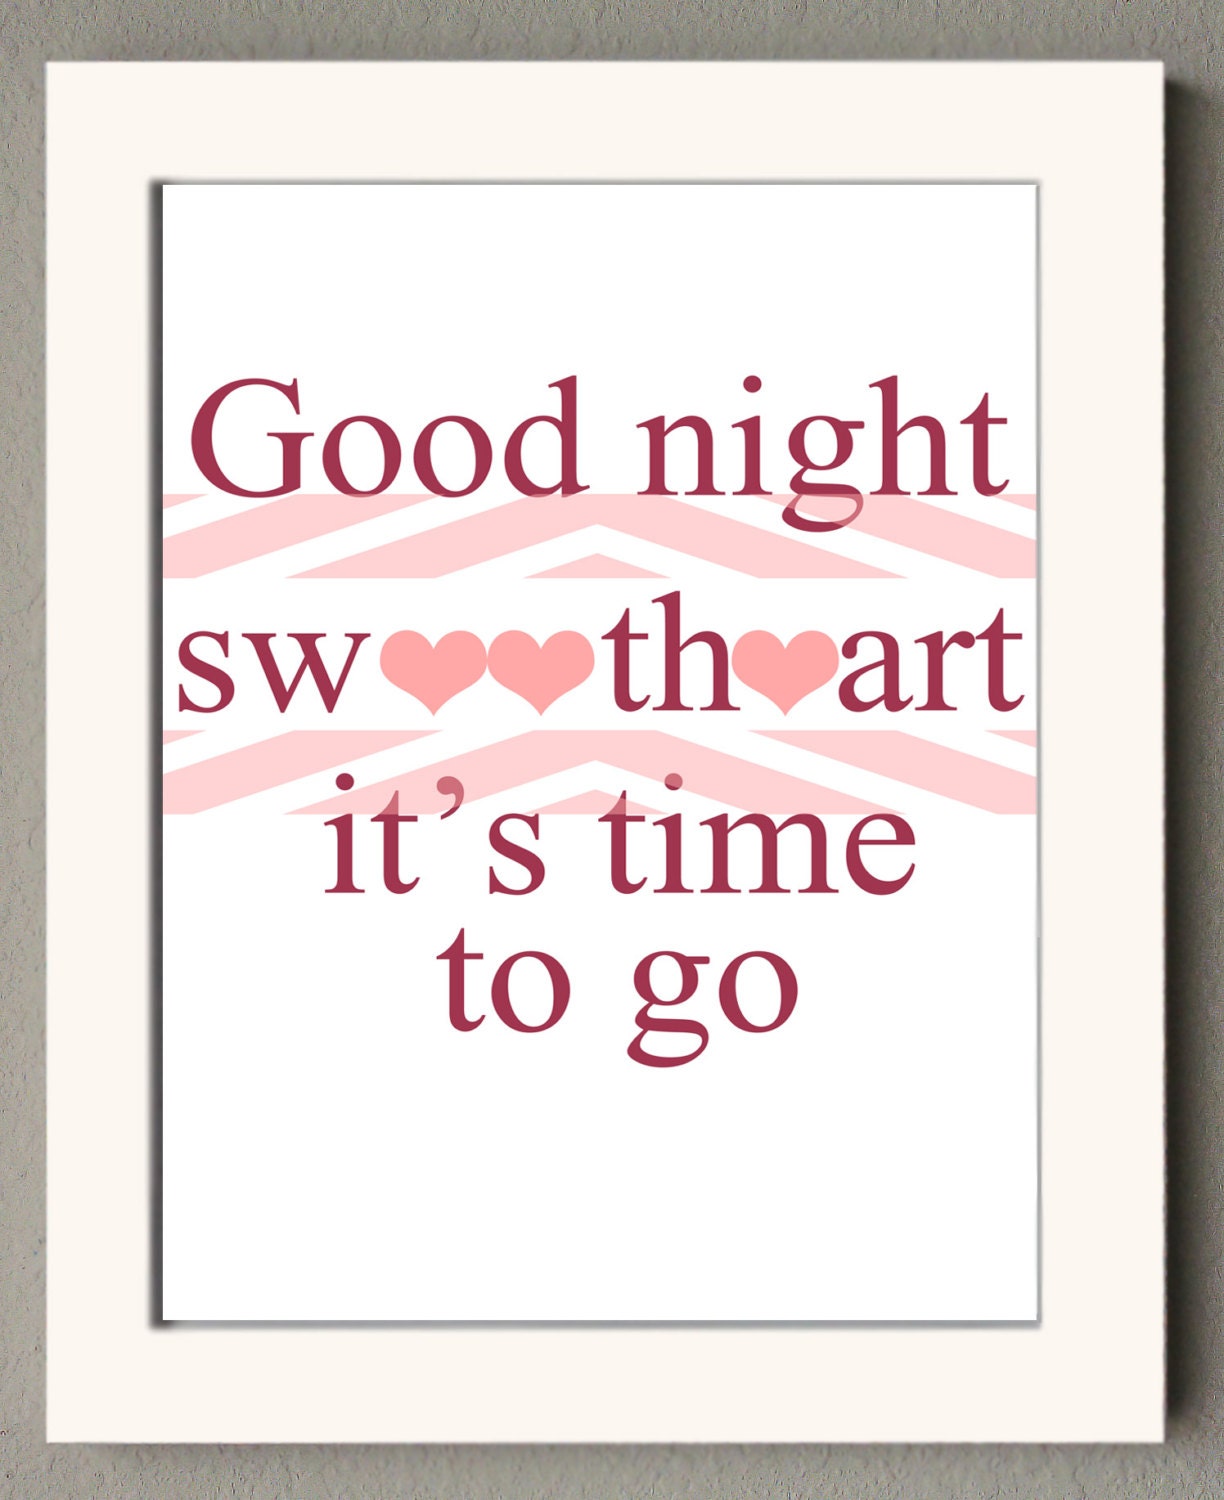 Items Similar To Good Night Sweetheart Its Time To Go Poster Print 